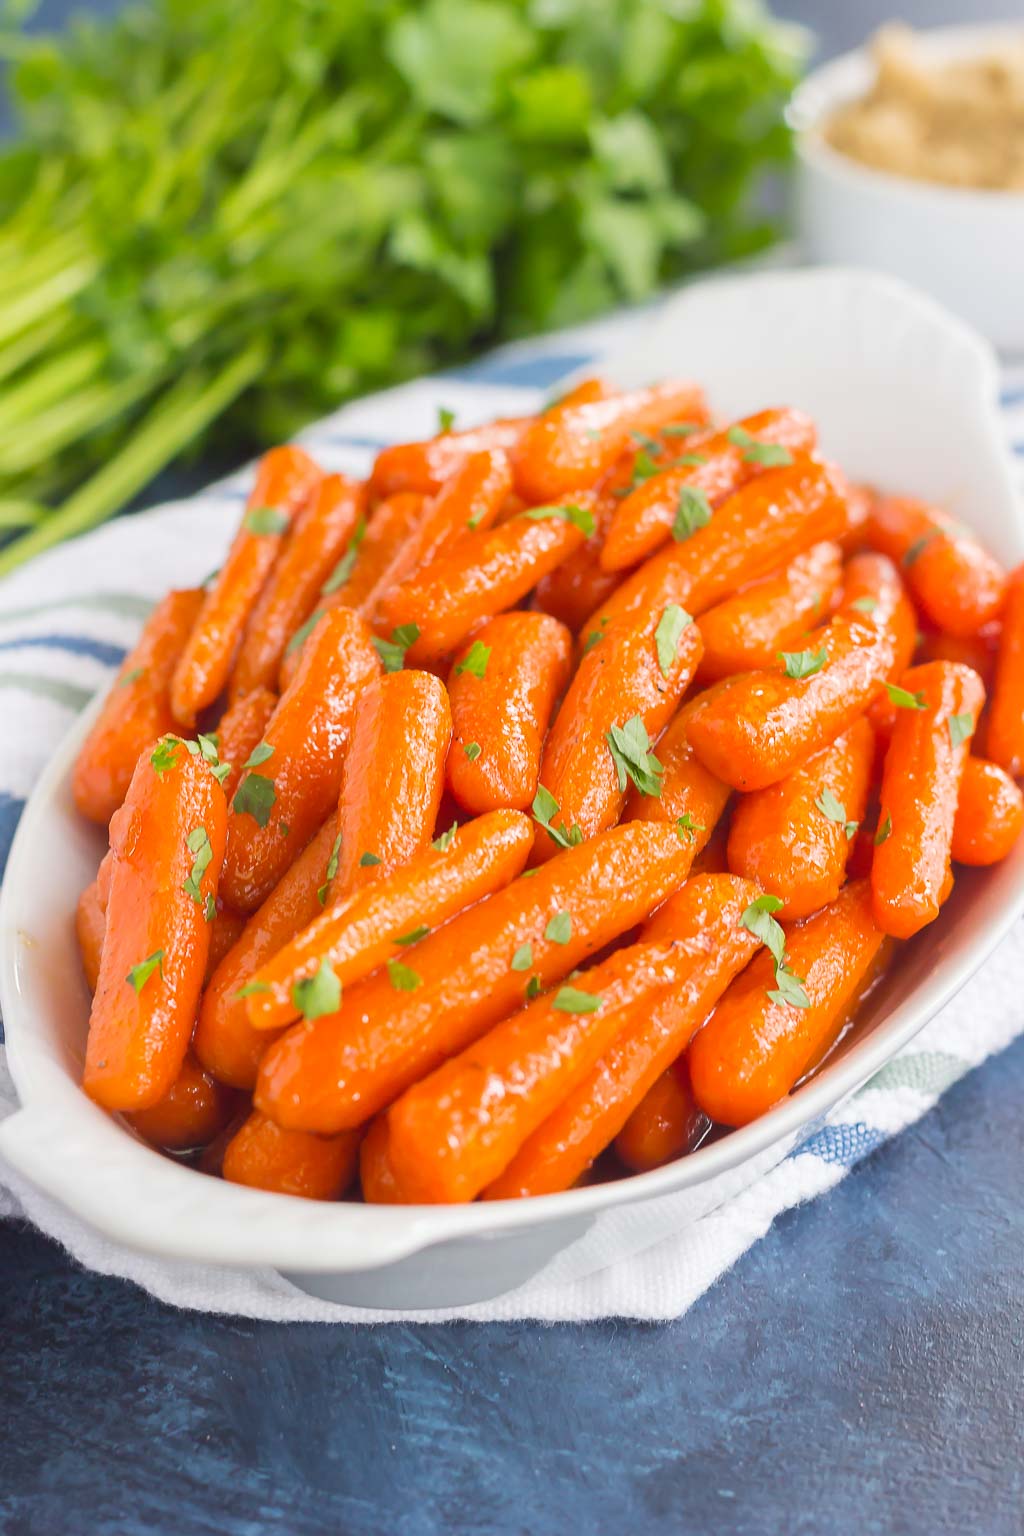 These Maple Brown Sugar Glazed Carrots are simple to prepare and full of warm flavors. The brown sugar and maple syrup creates a sweet glaze that coats the carrots with a welcoming taste!